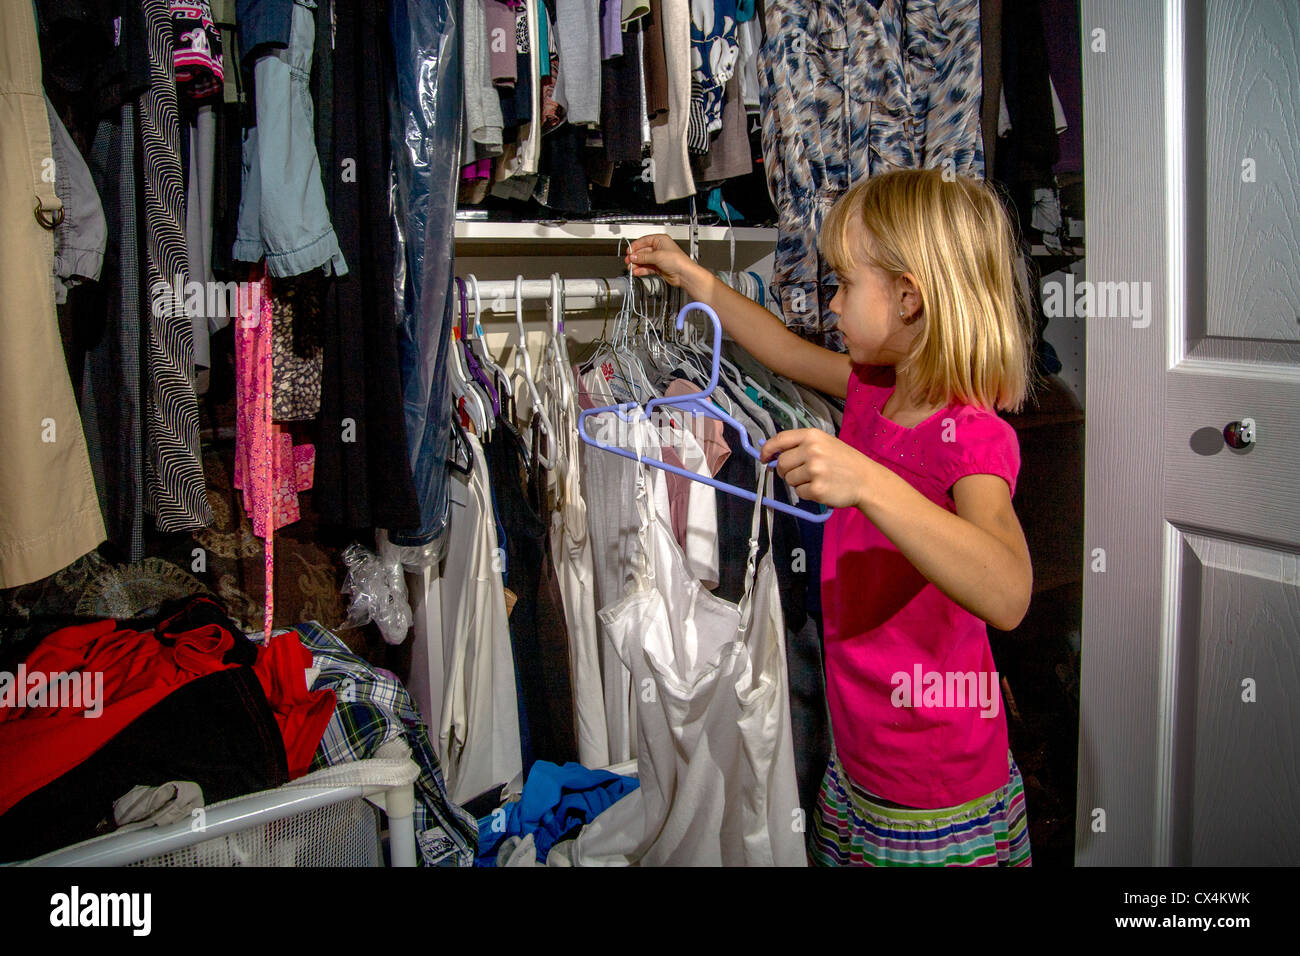 https://c8.alamy.com/comp/CX4KWK/helping-with-household-chores-a-seven-year-old-girl-hangs-clothes-CX4KWK.jpg